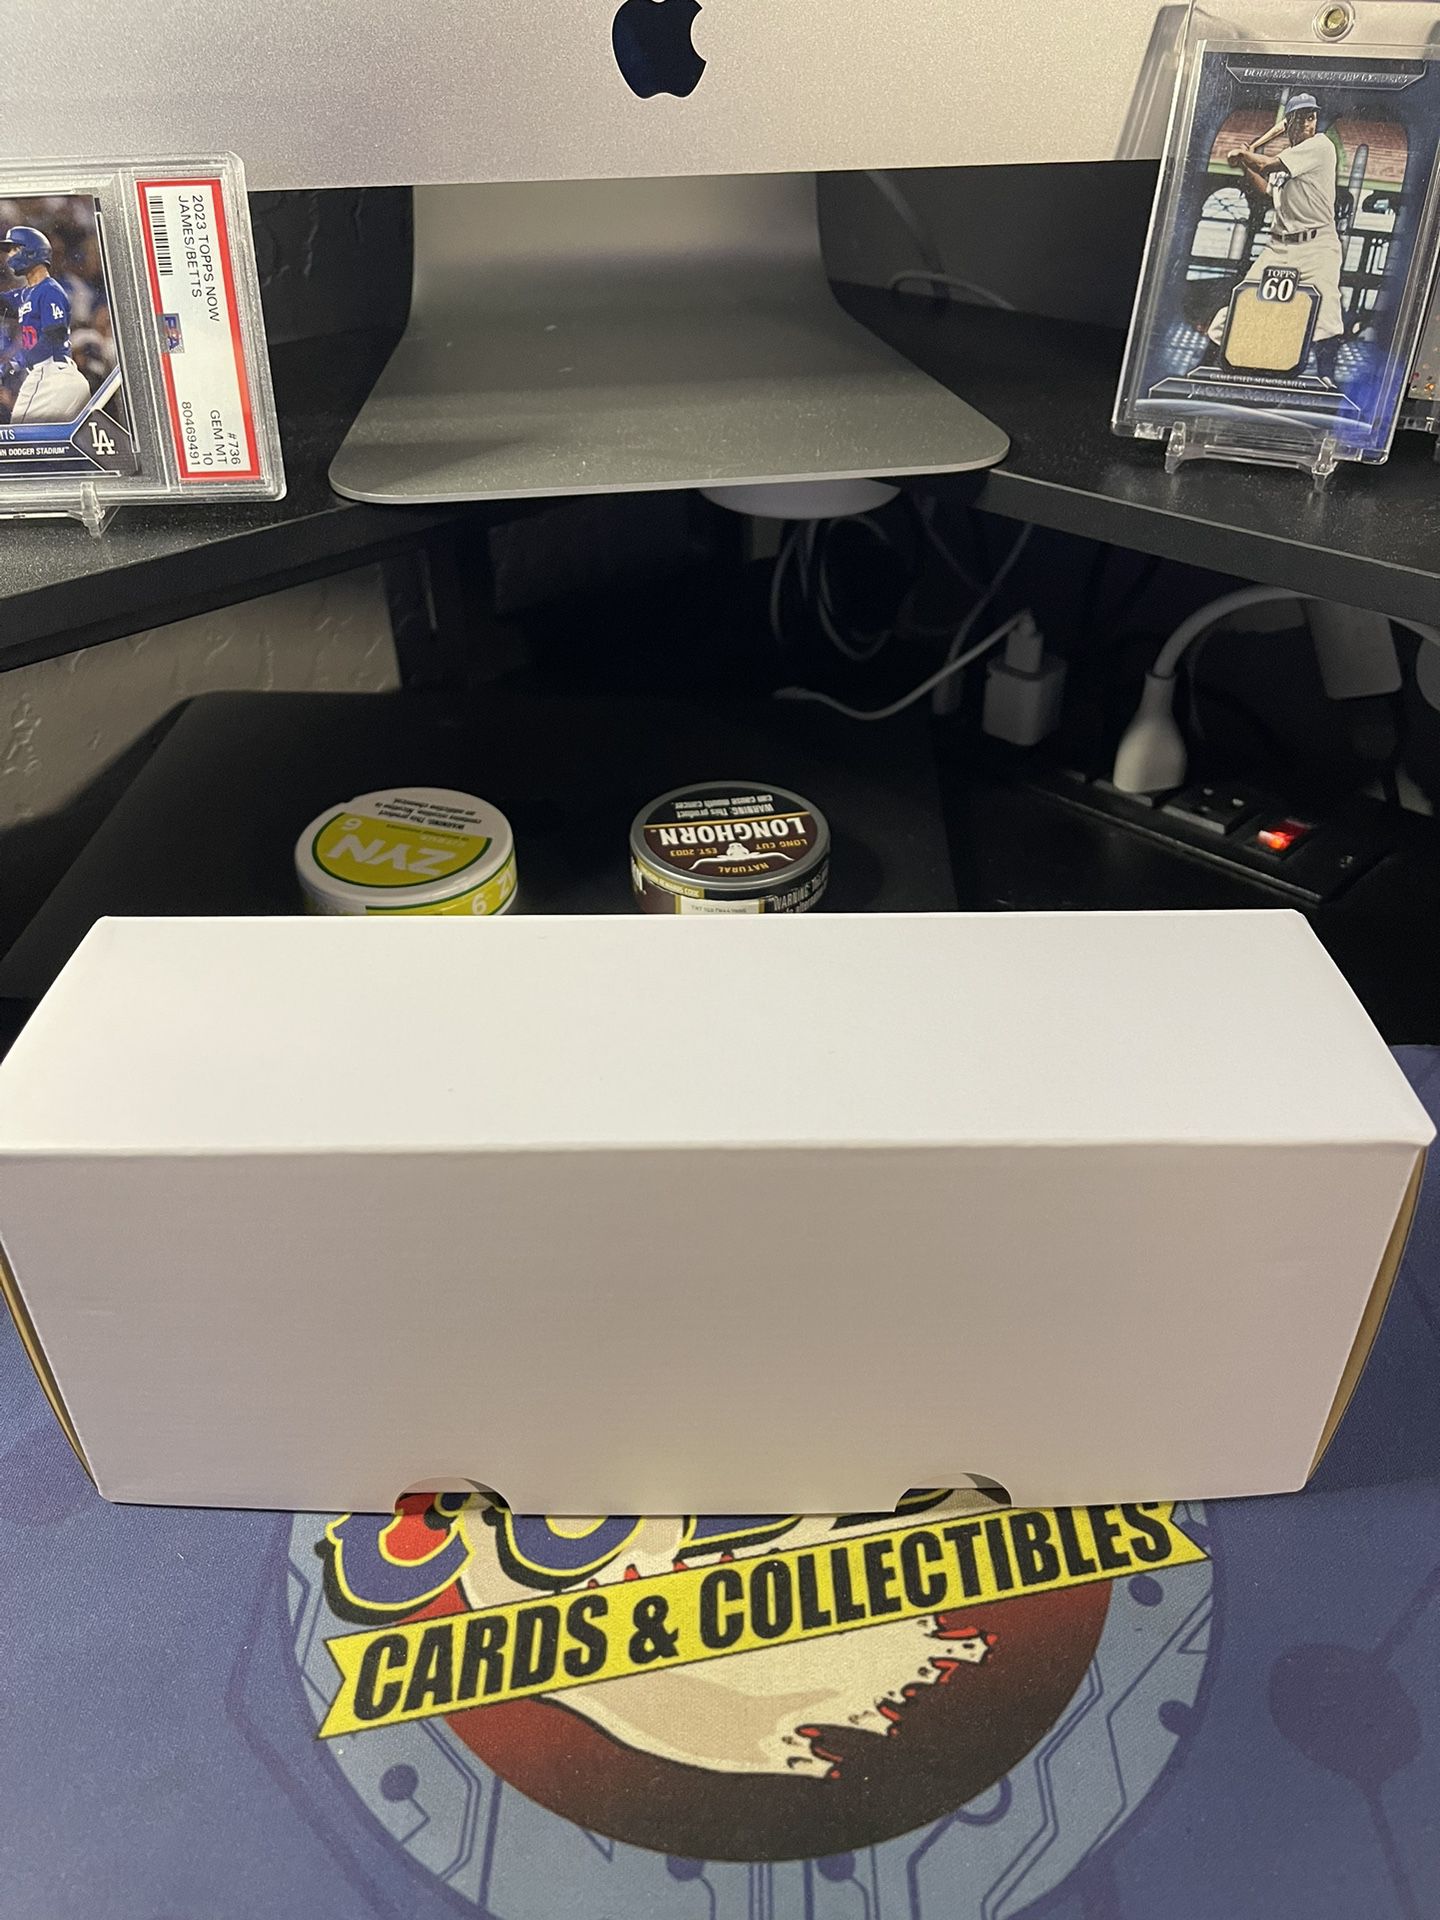 box of 2021-24 topps/bowman assorted baseball cards. rookies,stars,inserts. please see pictures for what type of cards are in the box.